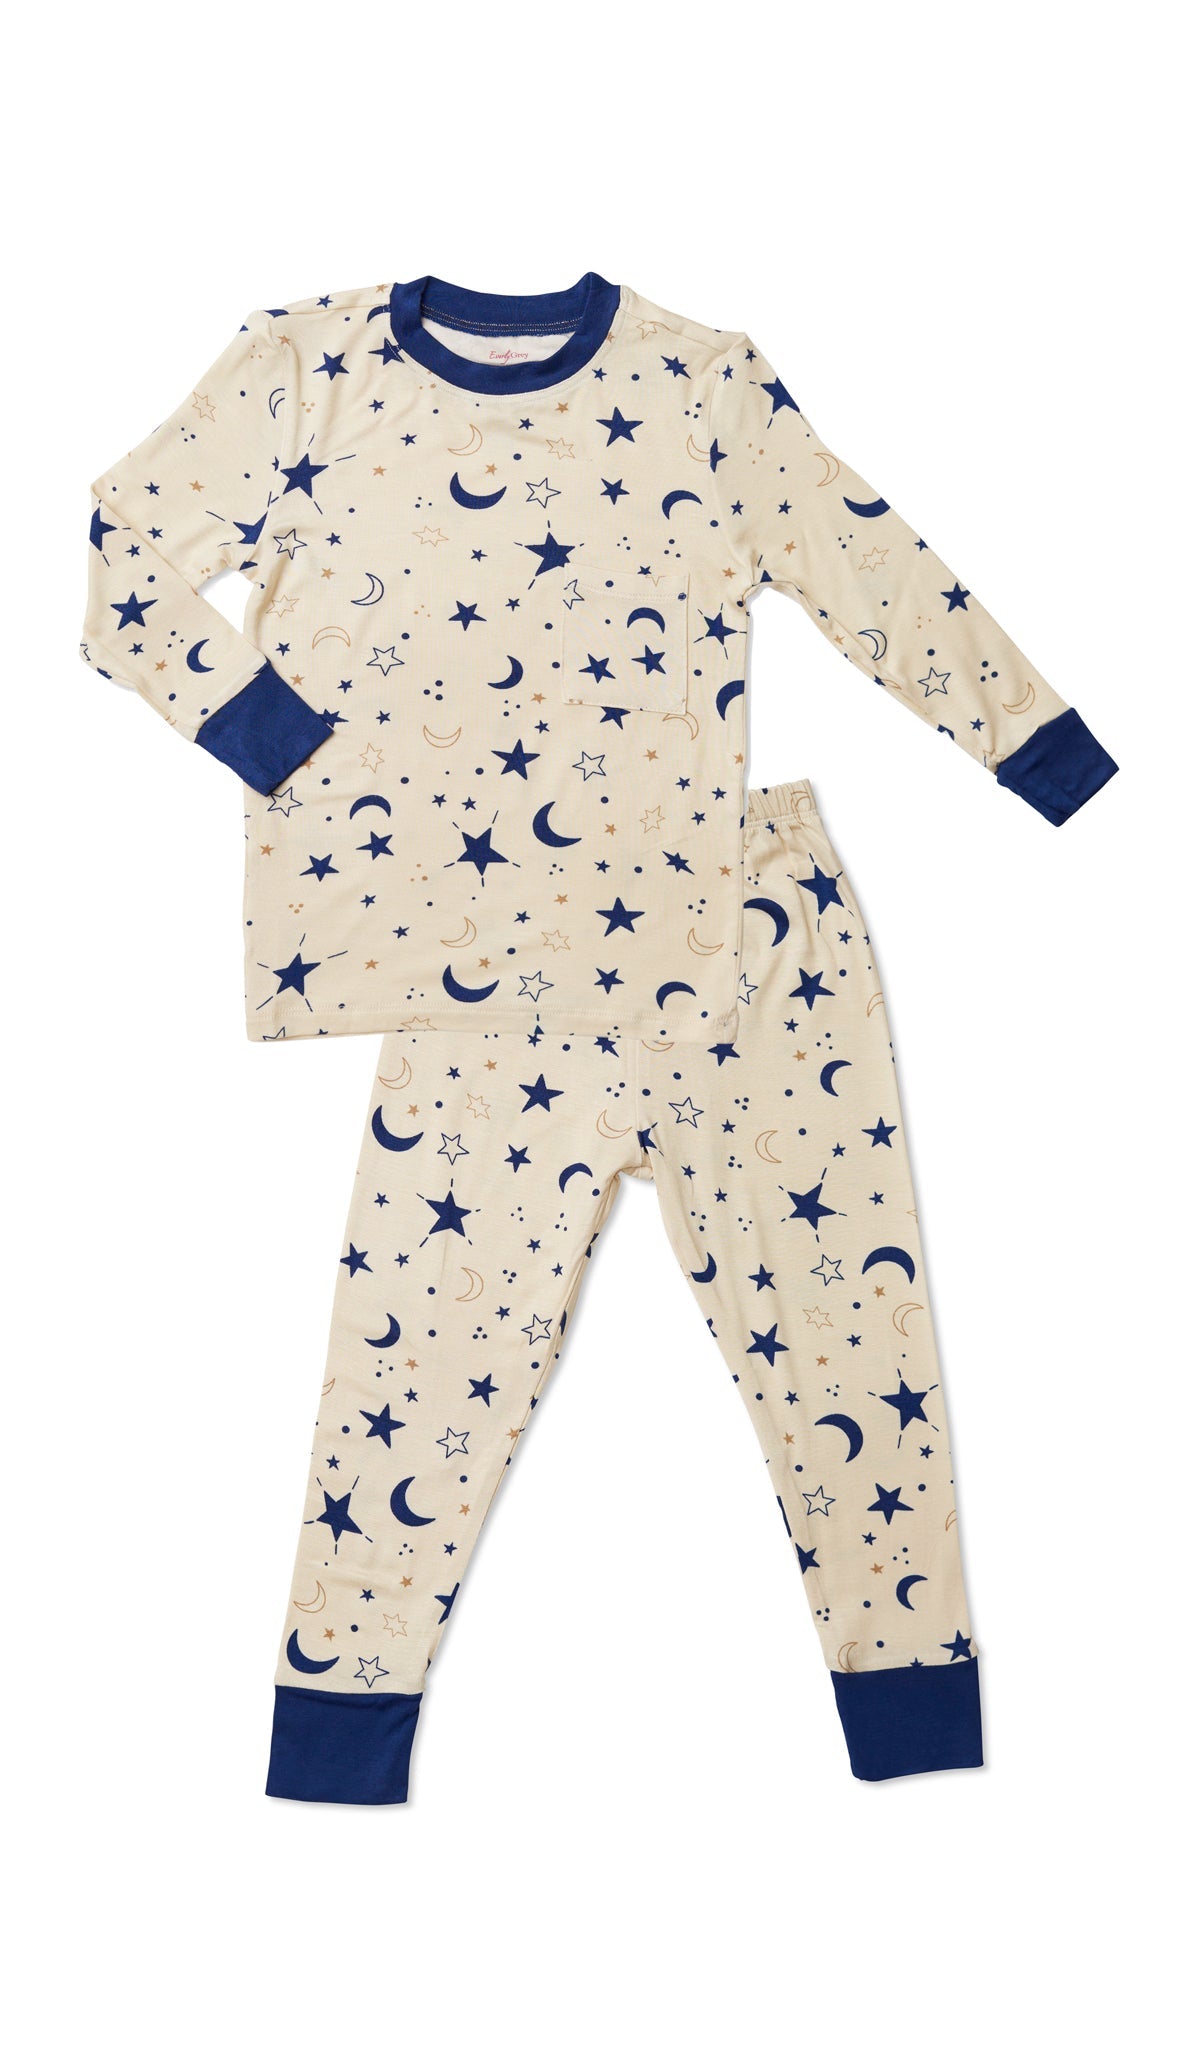 Emerson Kids 2 Piece Pant PJ - Twinkle flat shot of long sleeve top and long pant.